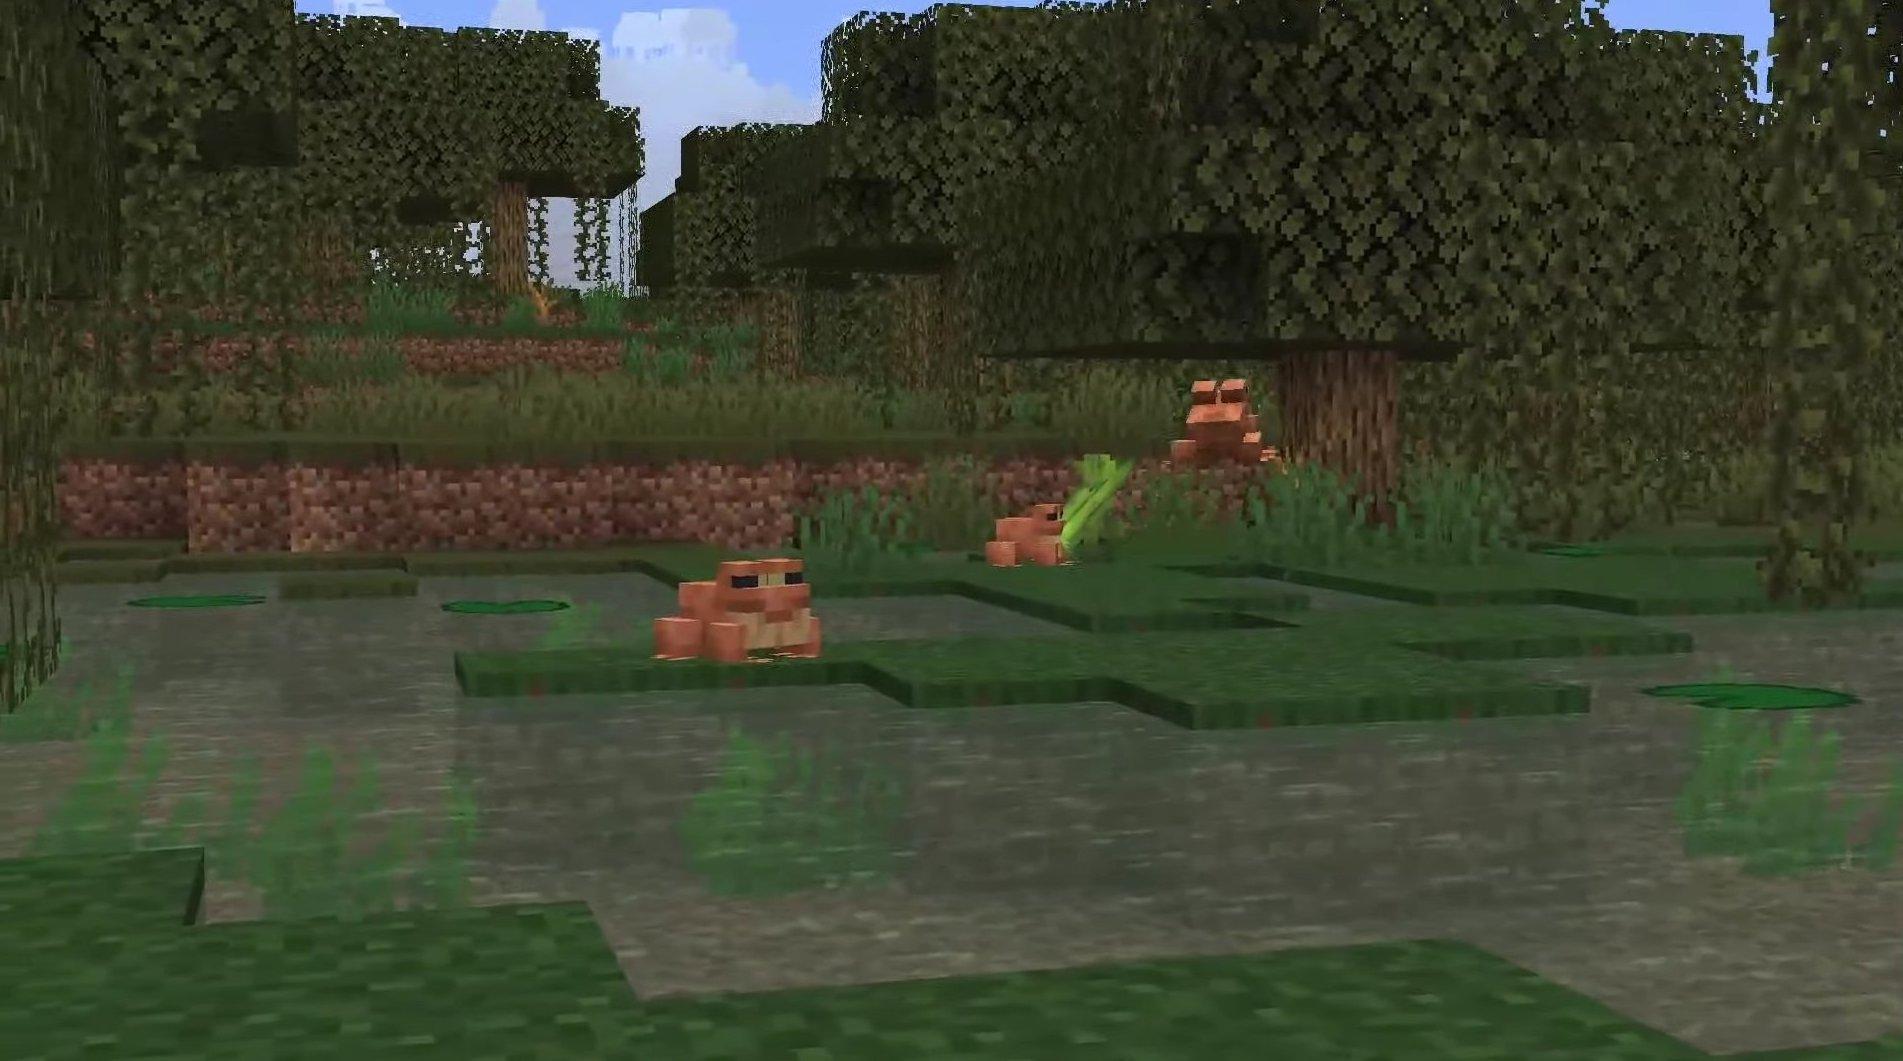 Minecraft version 1.19 is launching in June